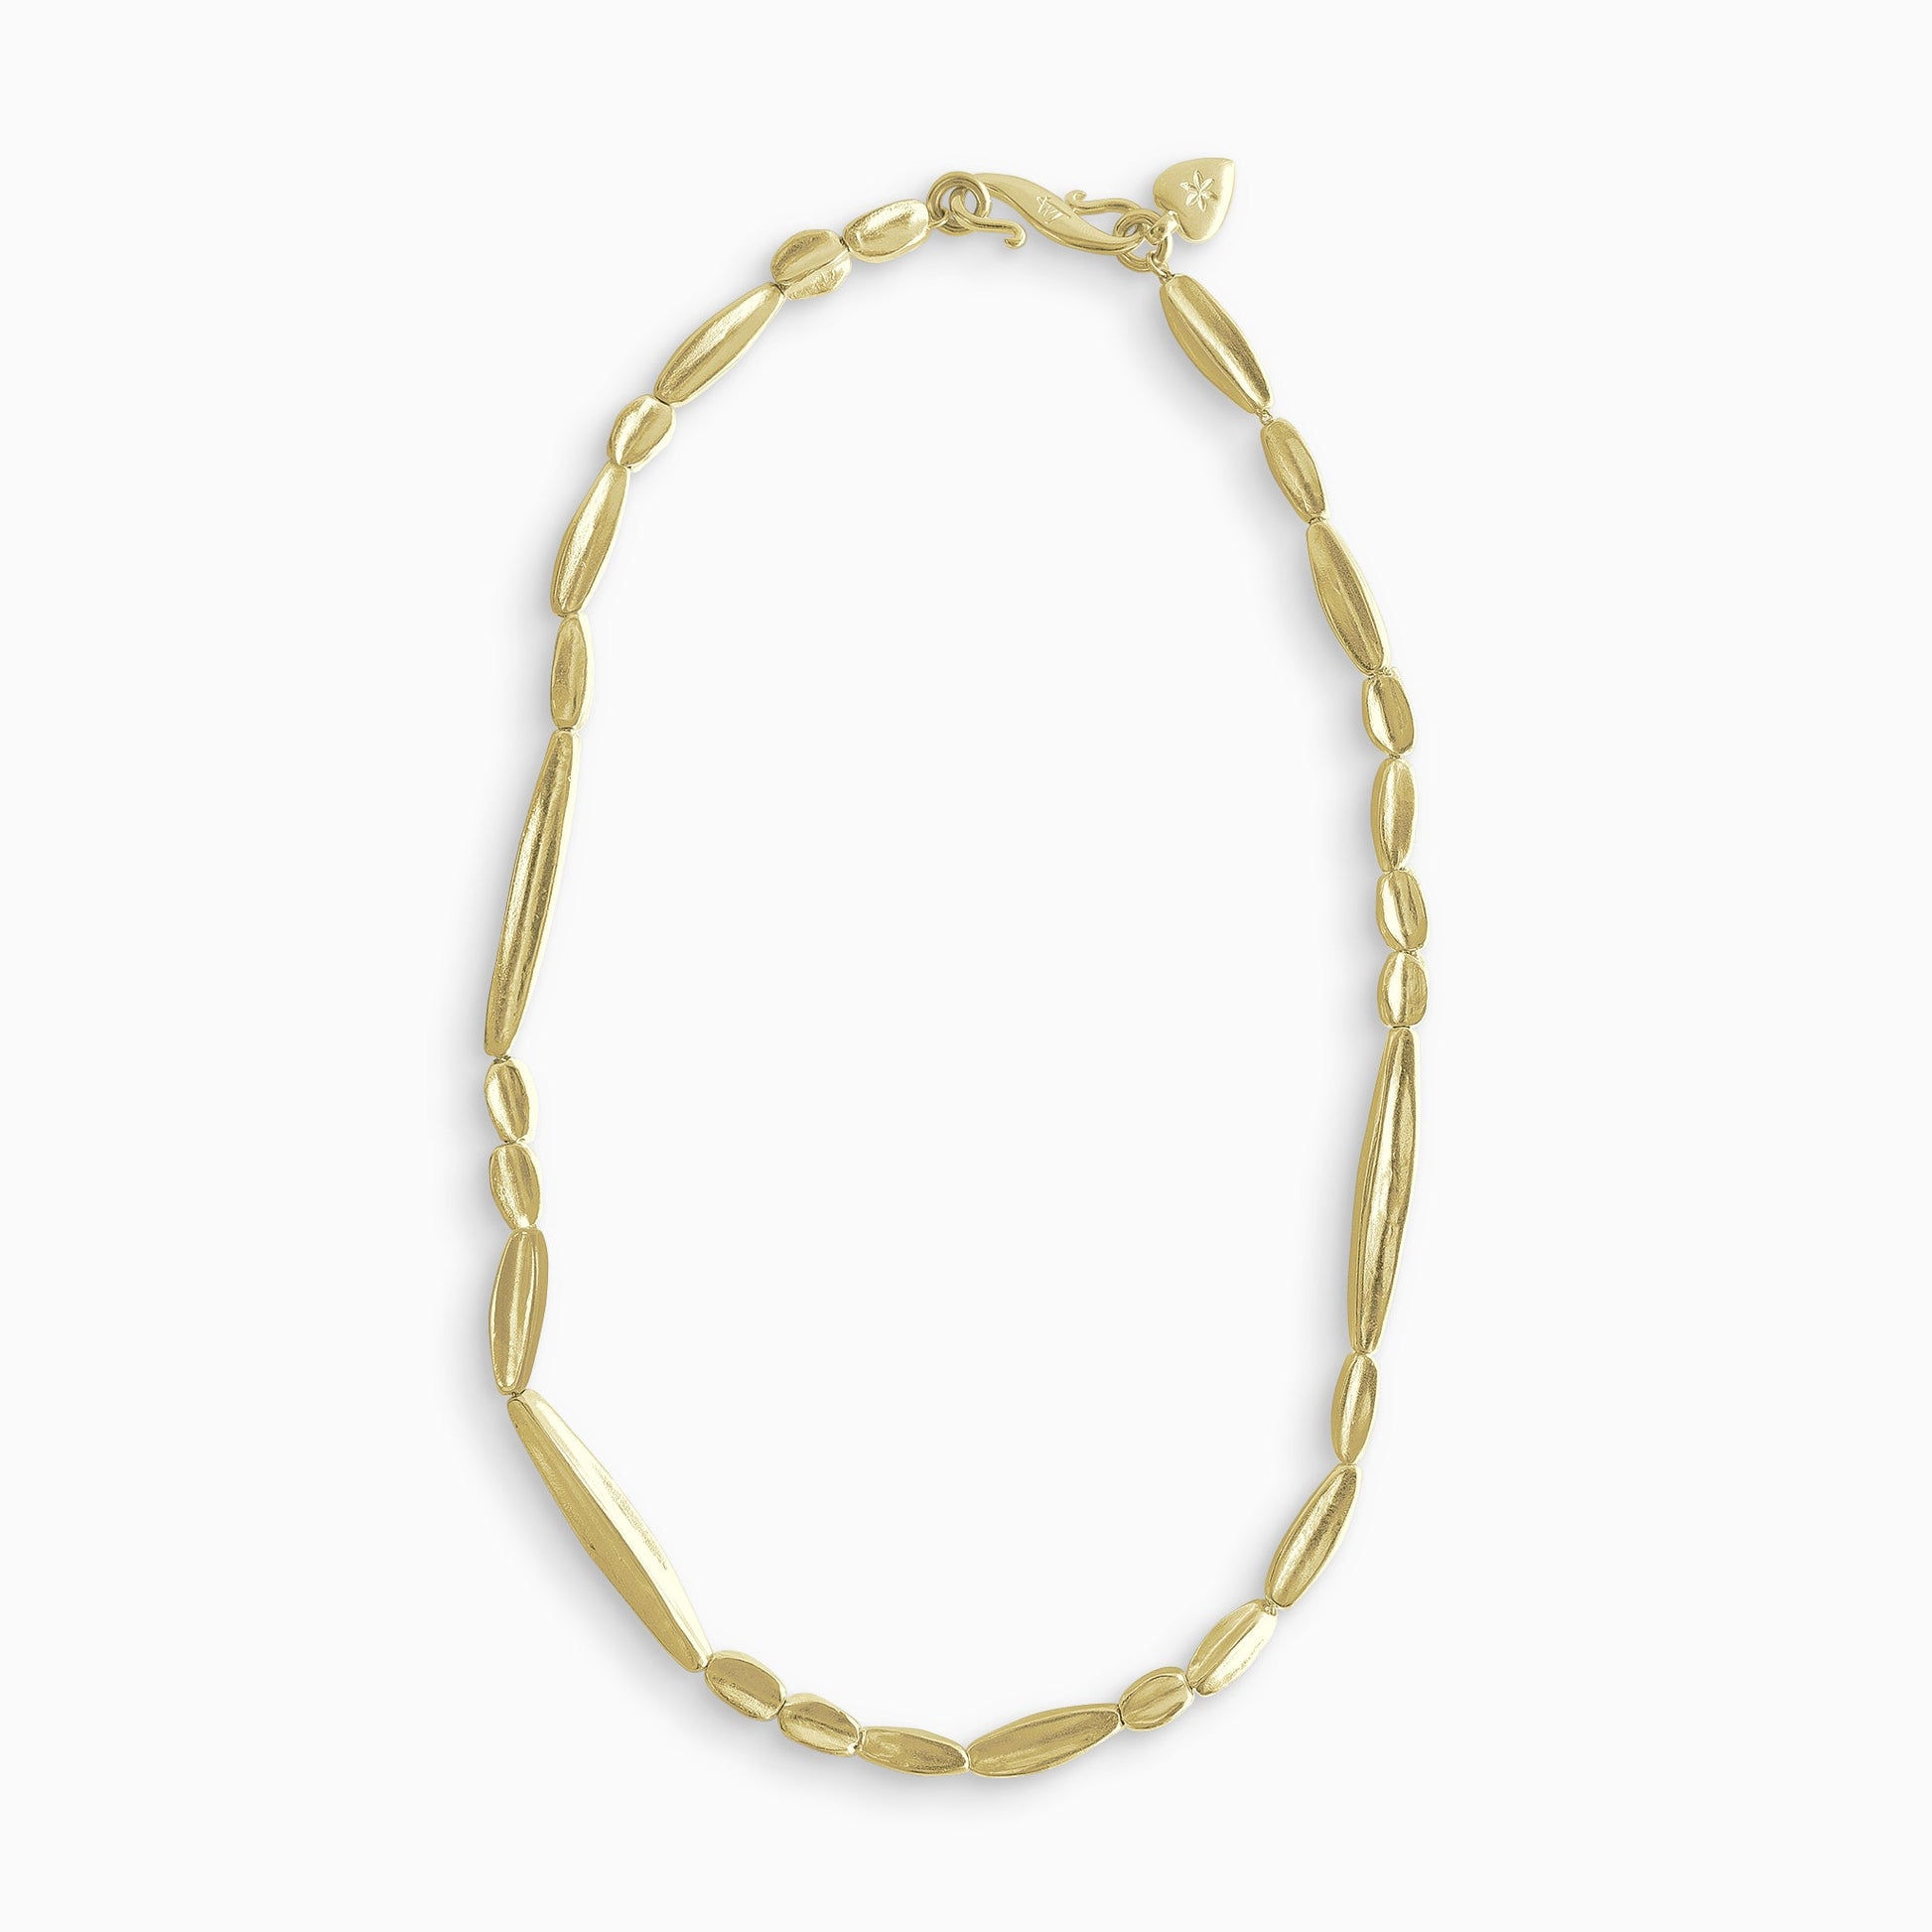 A necklace of 18ct Fairtrade yellow gold handmade solid beads, varying lengths randomly arranged, The length of the necklace is 45cm. Each bead is tapered at the ends, concave and square in section, gently organic with a strong weight. Beads are approximately from.10mm to 29mm in length, 5mm square at the centres and 2mm square at the tapered ends.